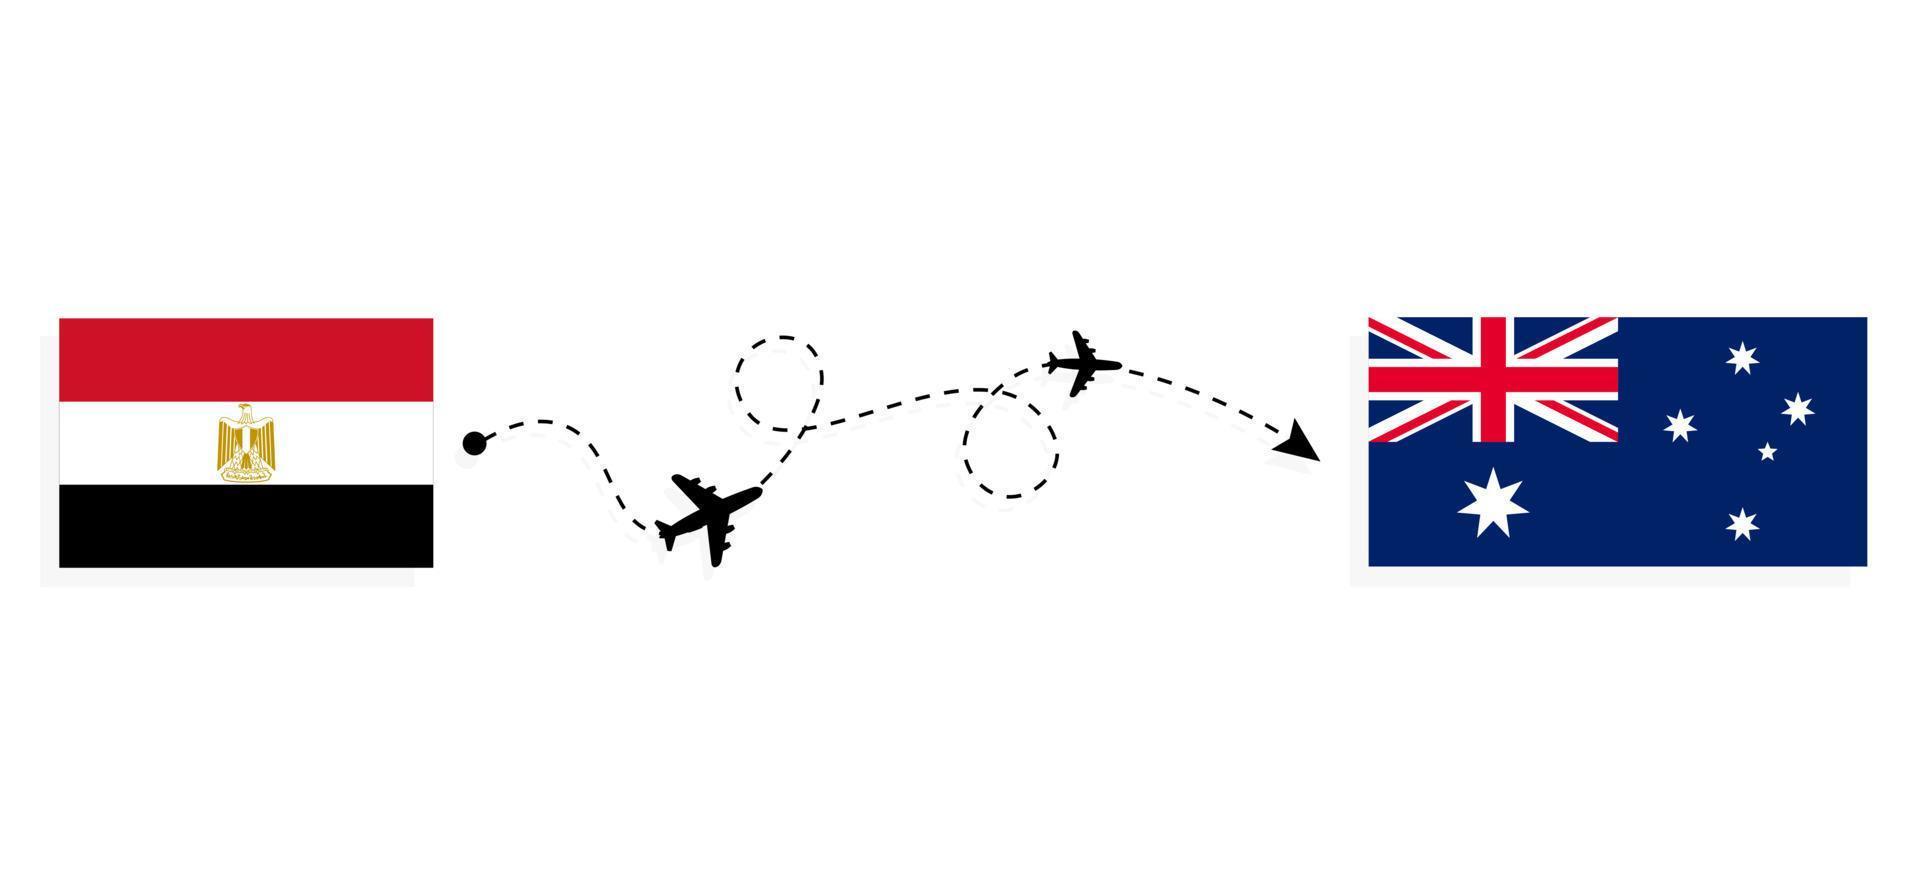 Flight and travel from Egypt to Australia by passenger airplane Travel concept vector